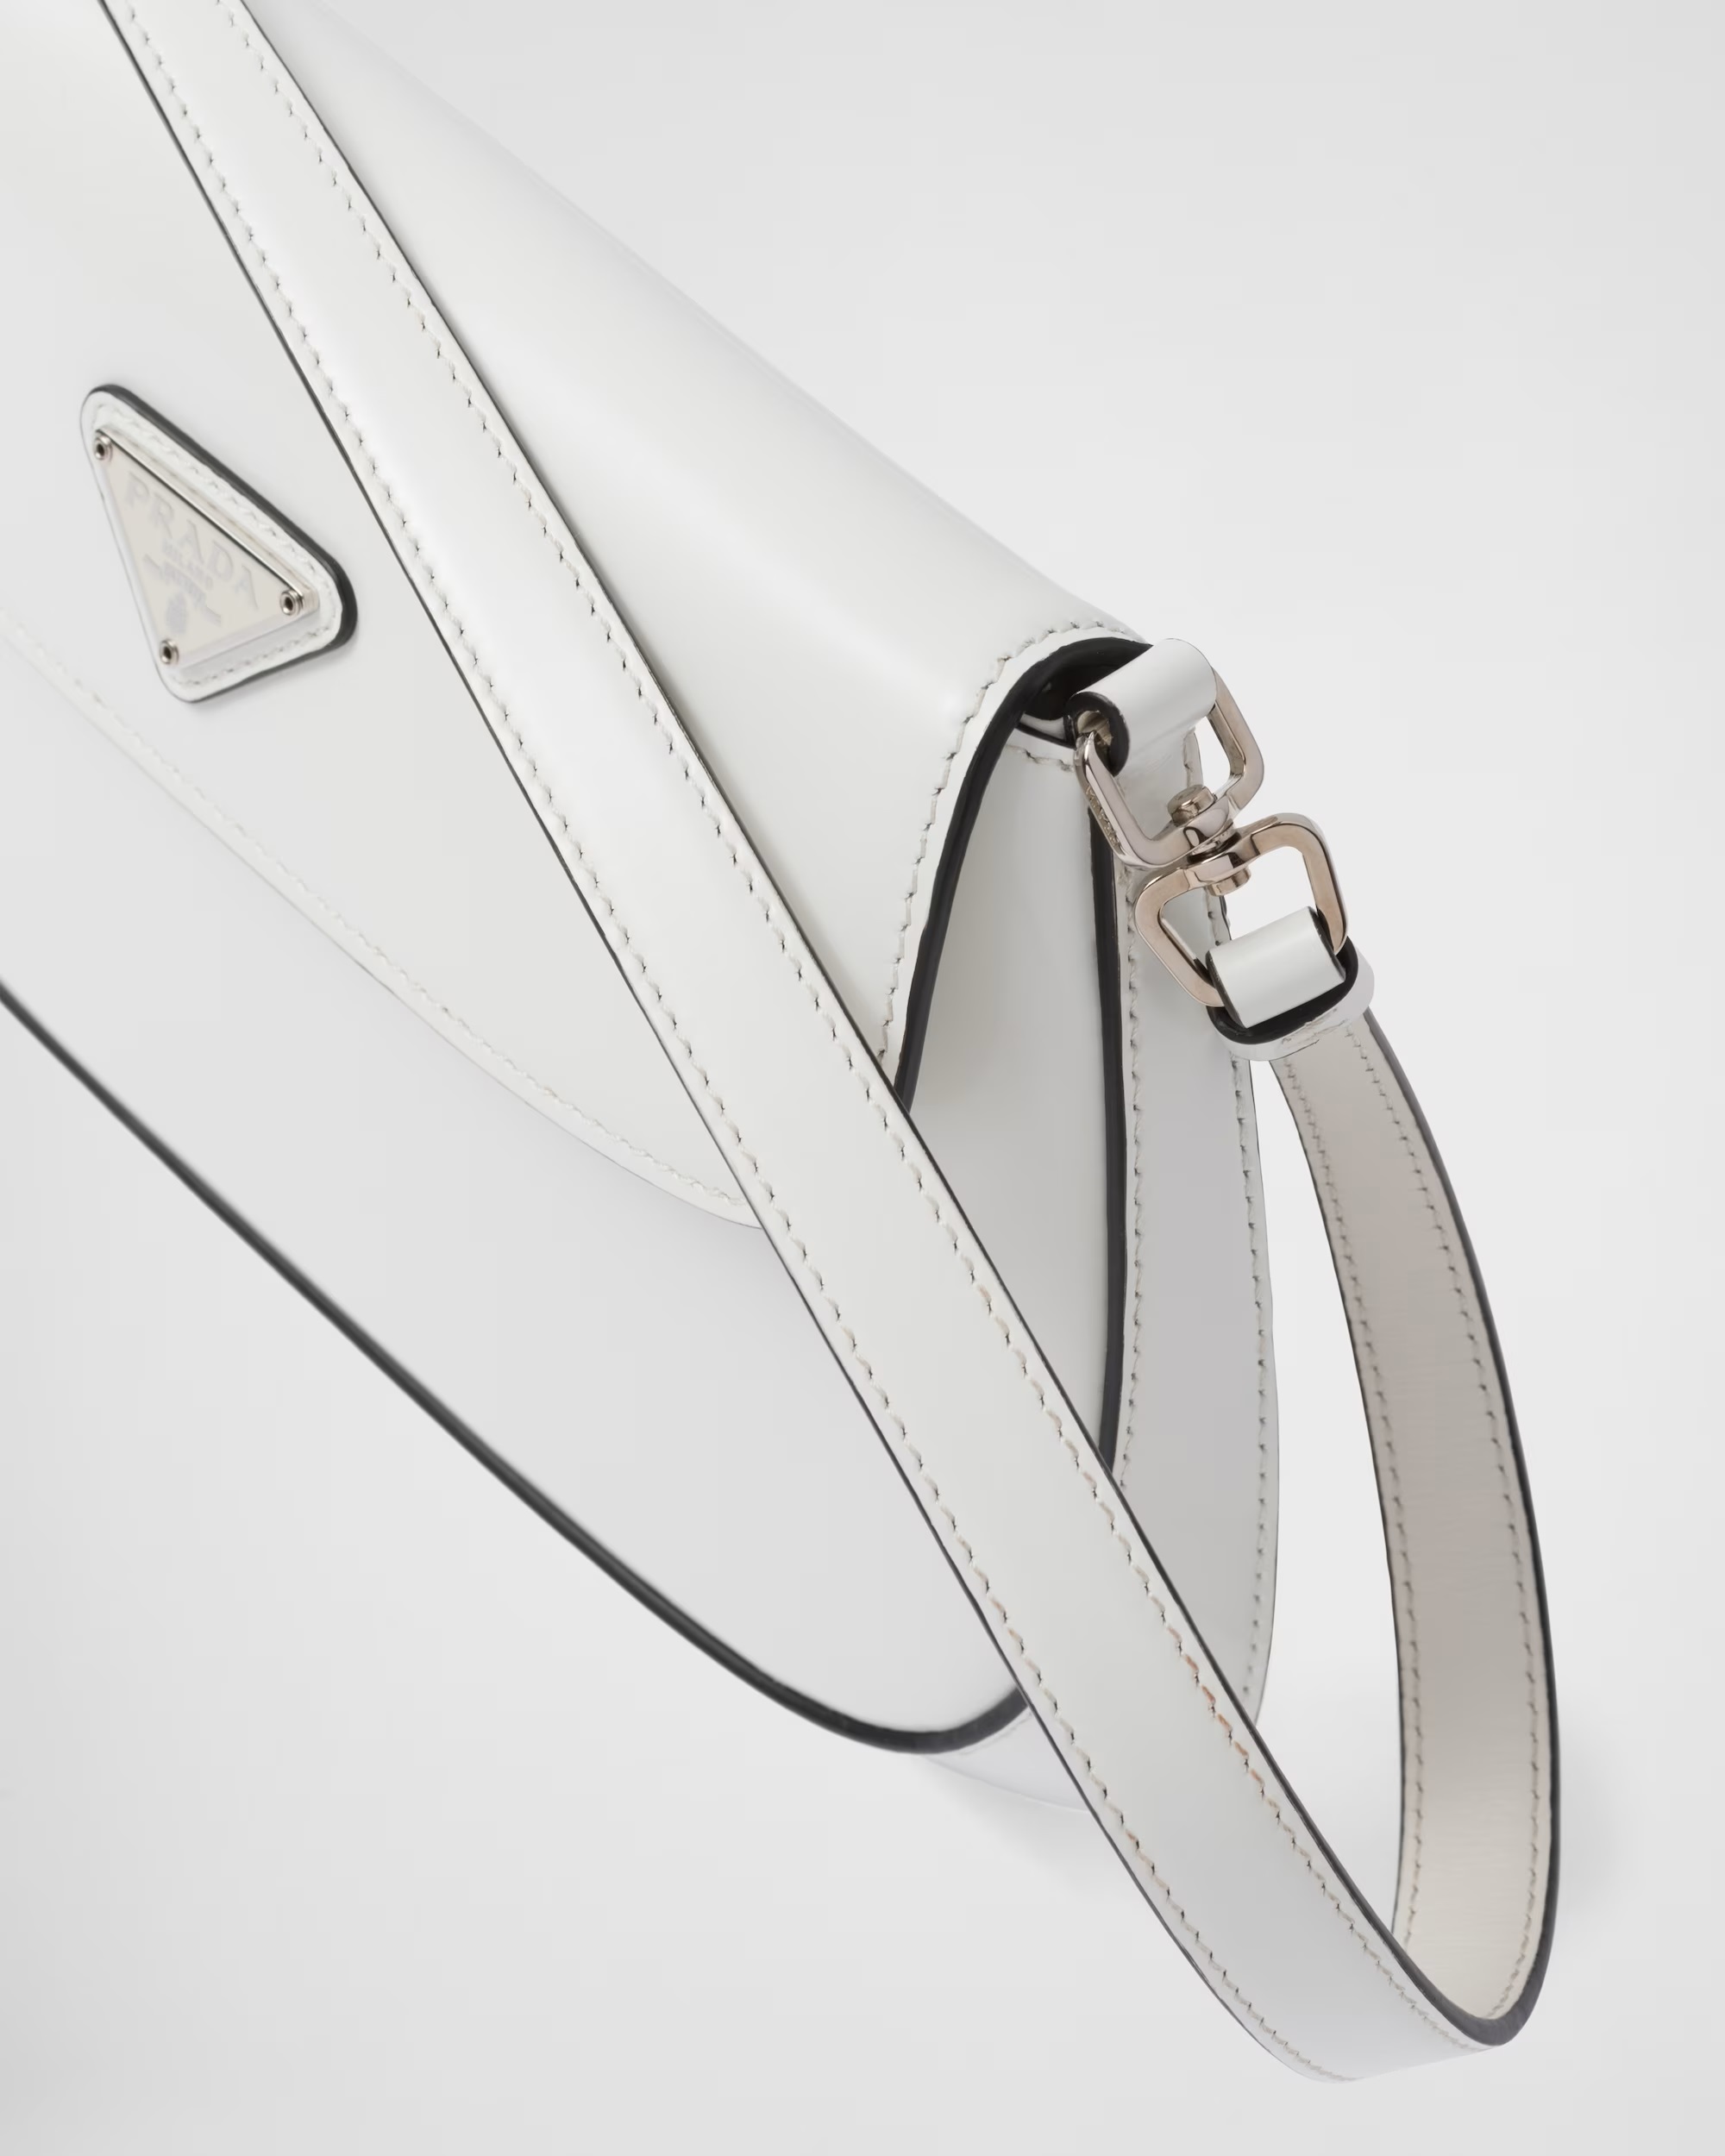 TÚI XÁCH PRADA CLEO BRUSHED LEATHER SHOULDER BAG WITH FLAP 22